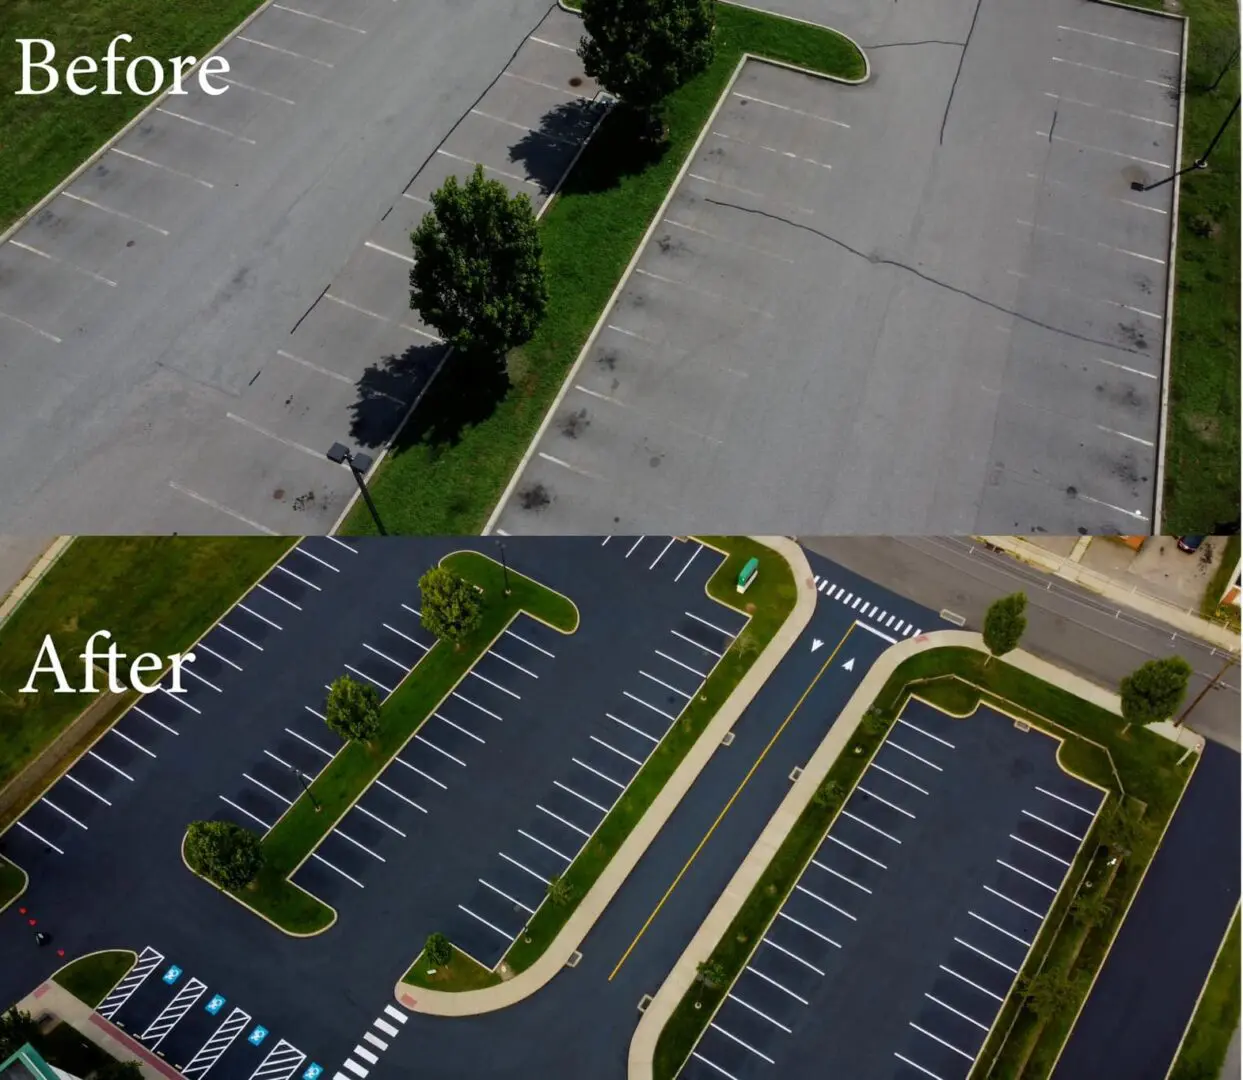 A before and after picture of an empty parking lot.